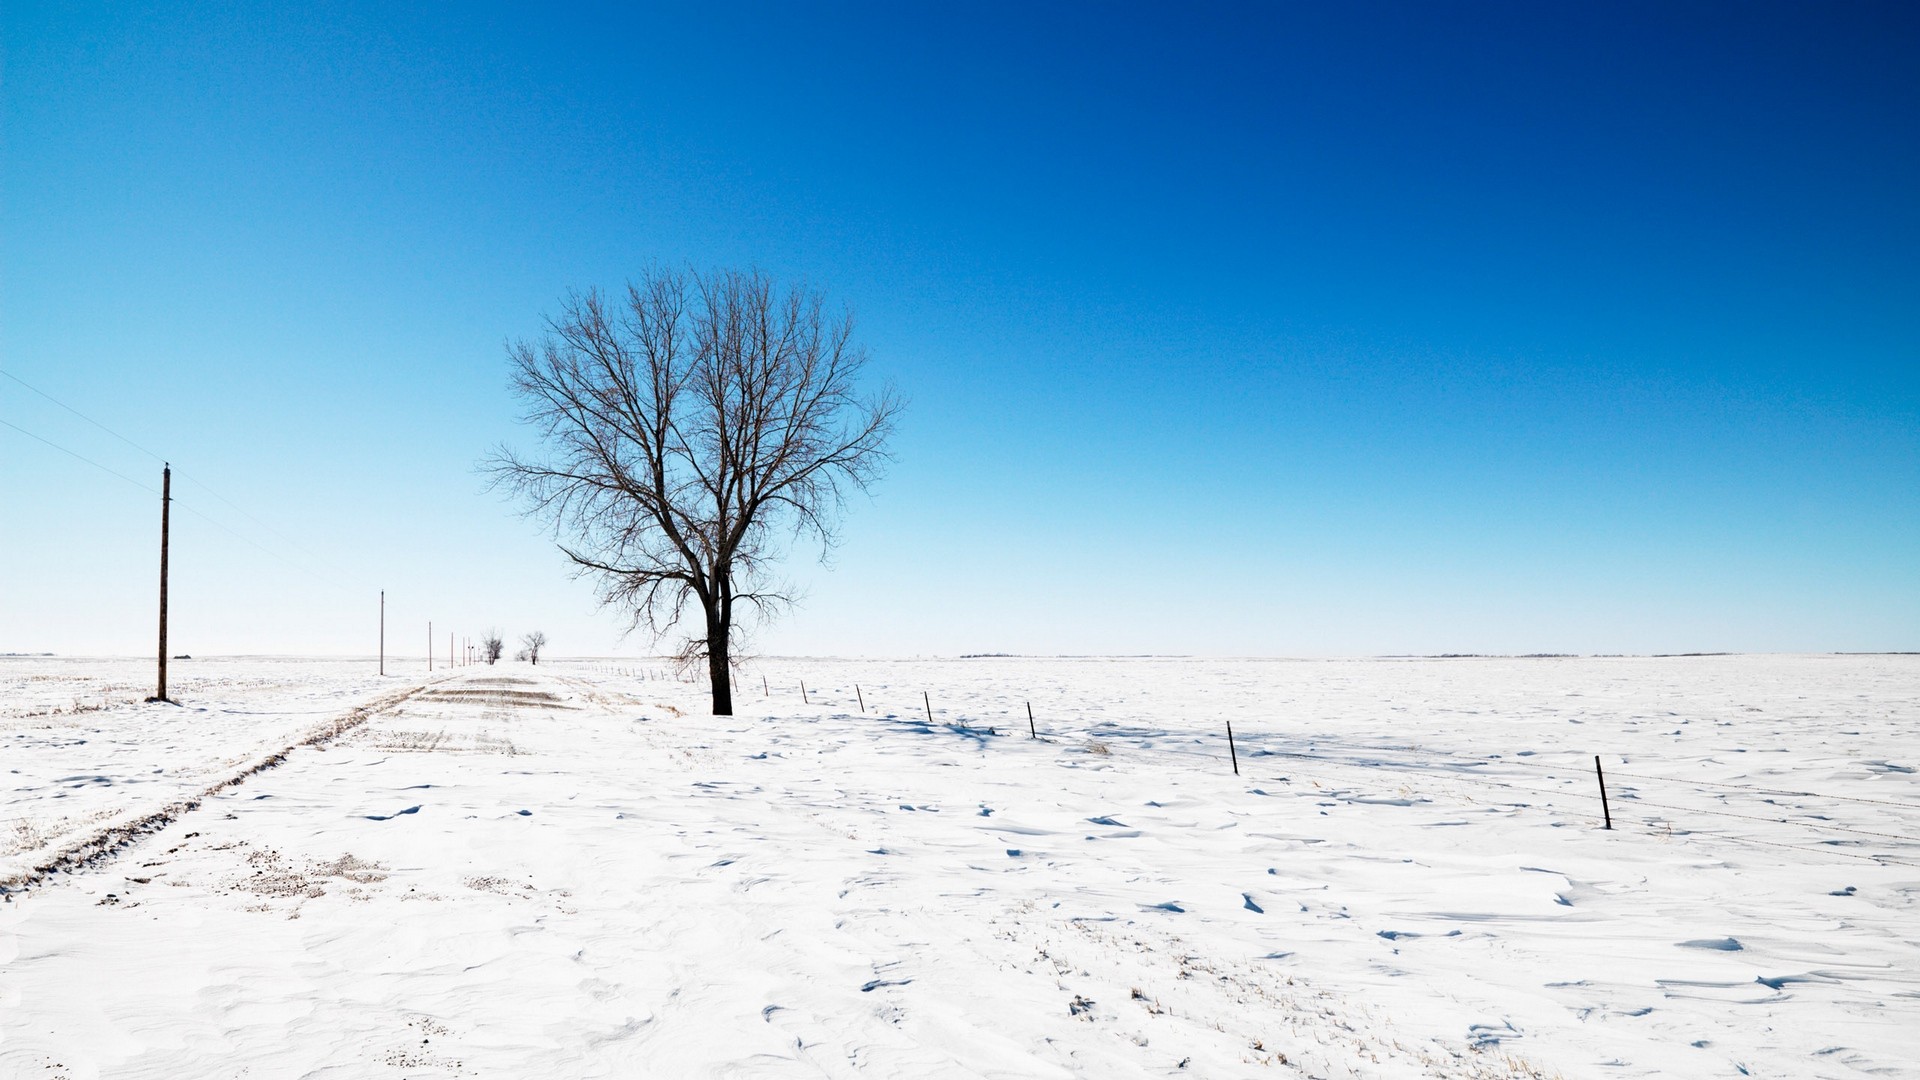 General 1920x1080 trees snow cold ice winter landscape outdoors field